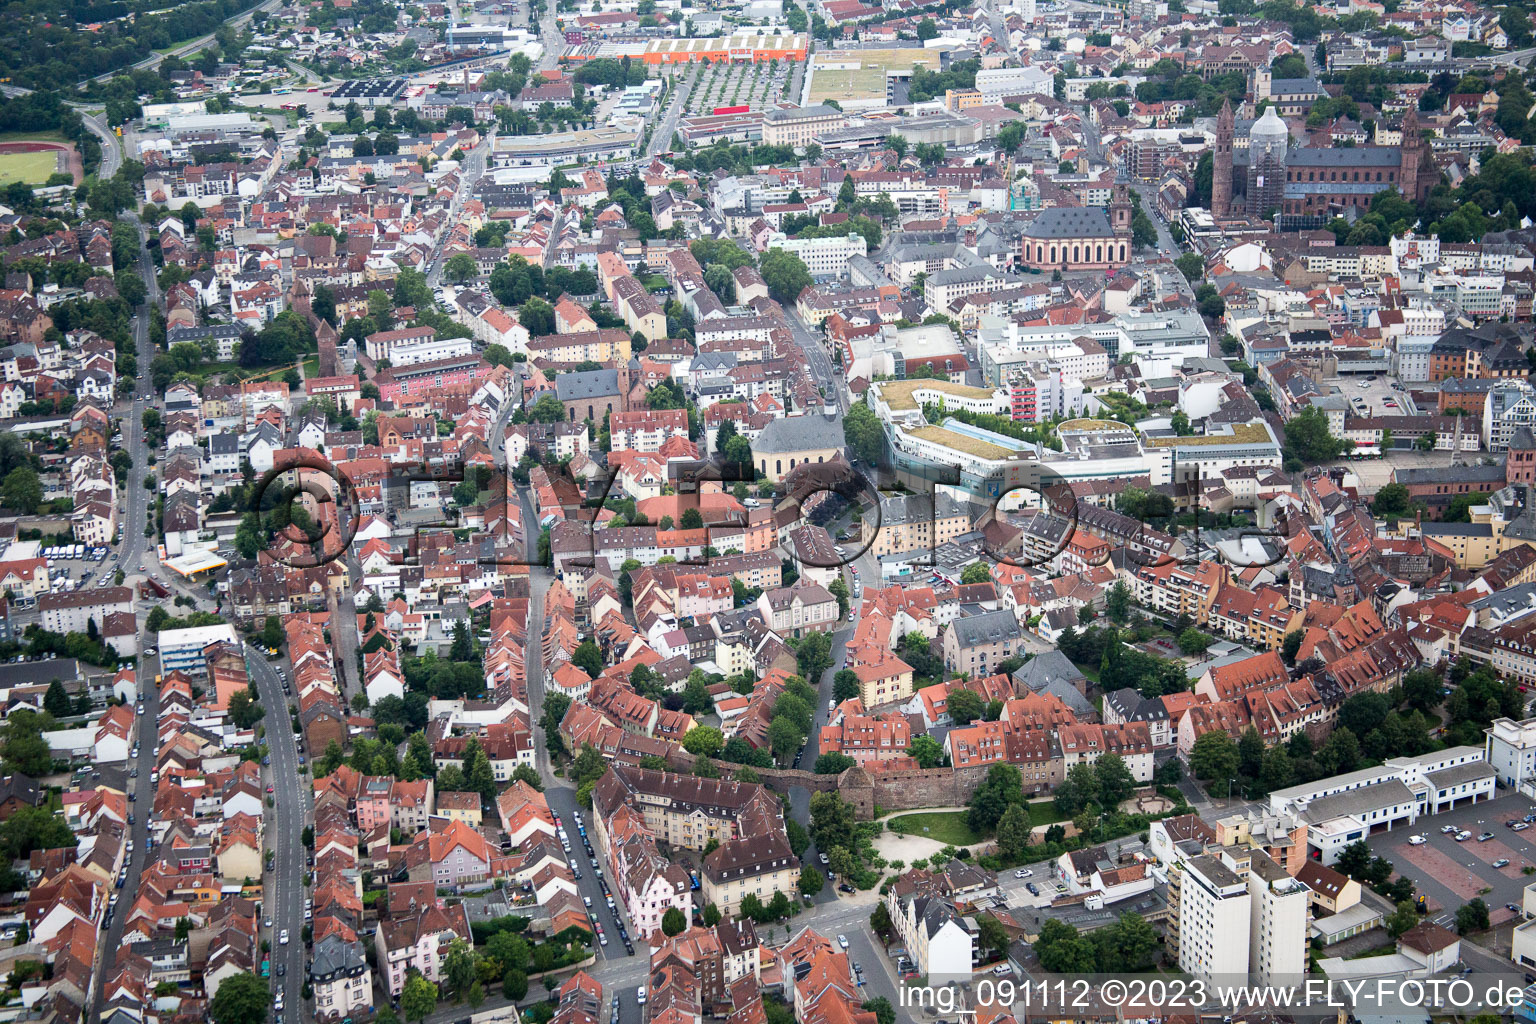 Aerial view of Old town in Worms in the state Rhineland-Palatinate, Germany